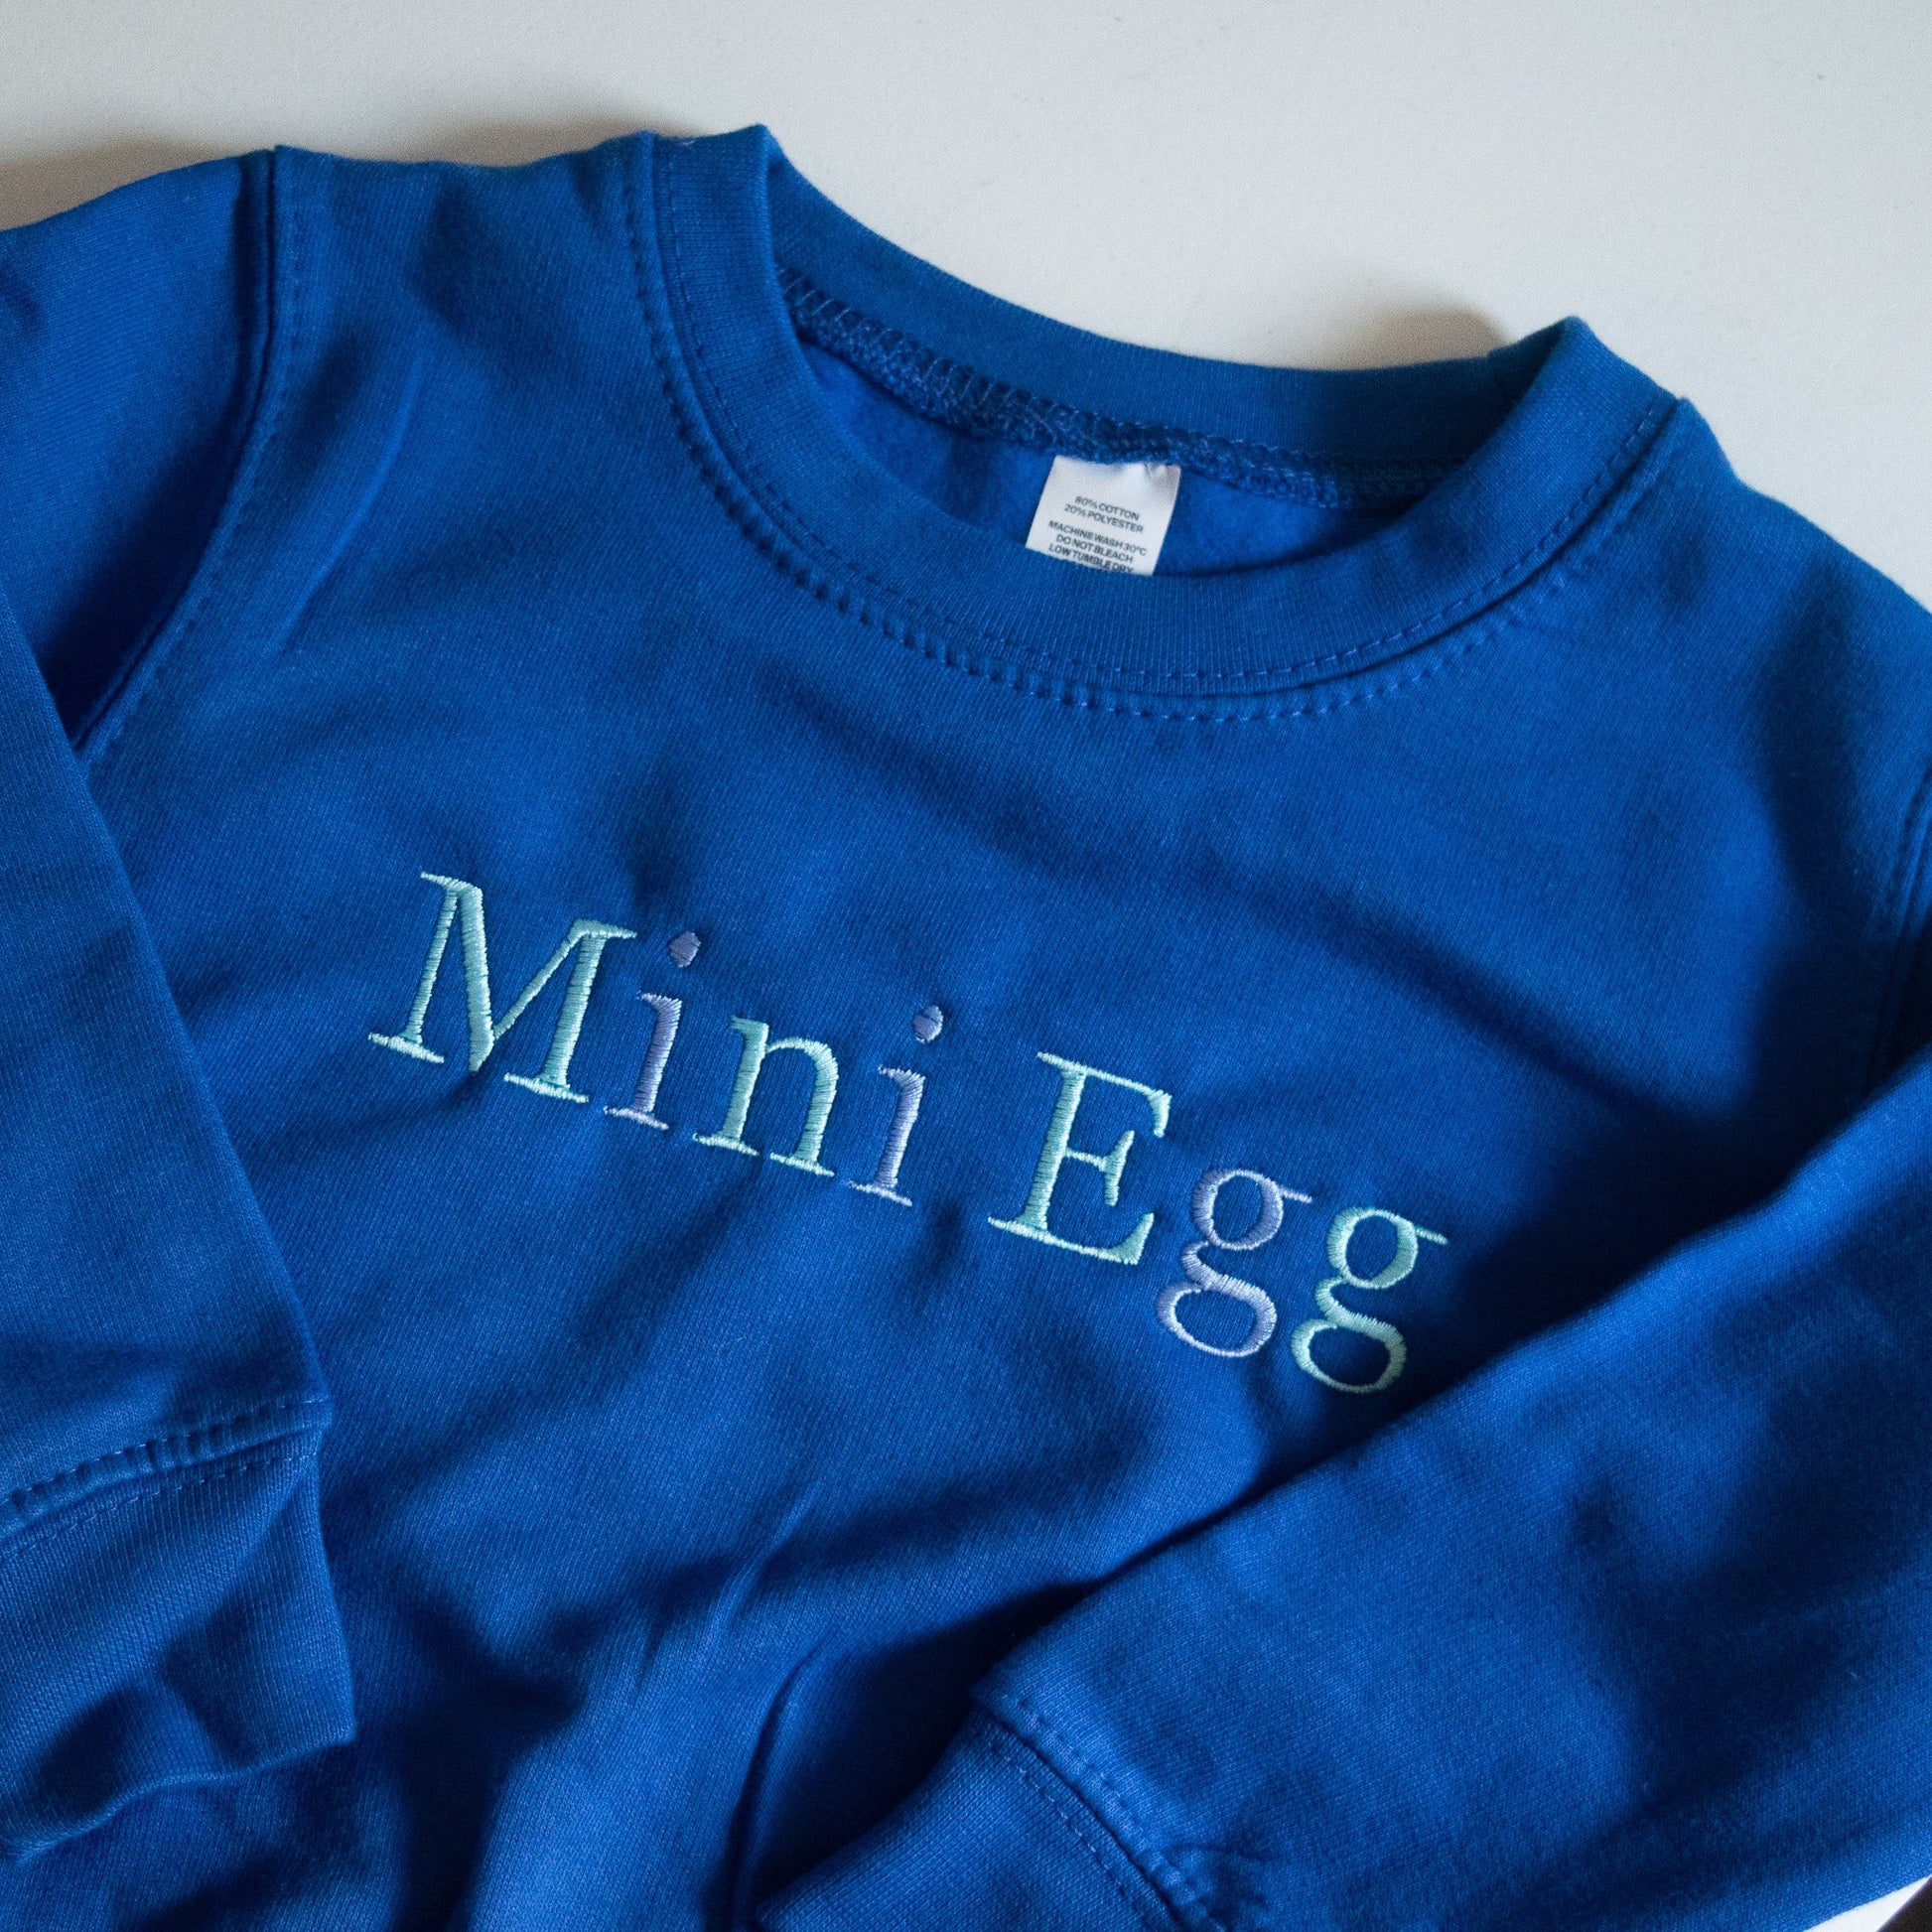 custom kids personalised jumper sweater in blue with blue mix of threads with name on it